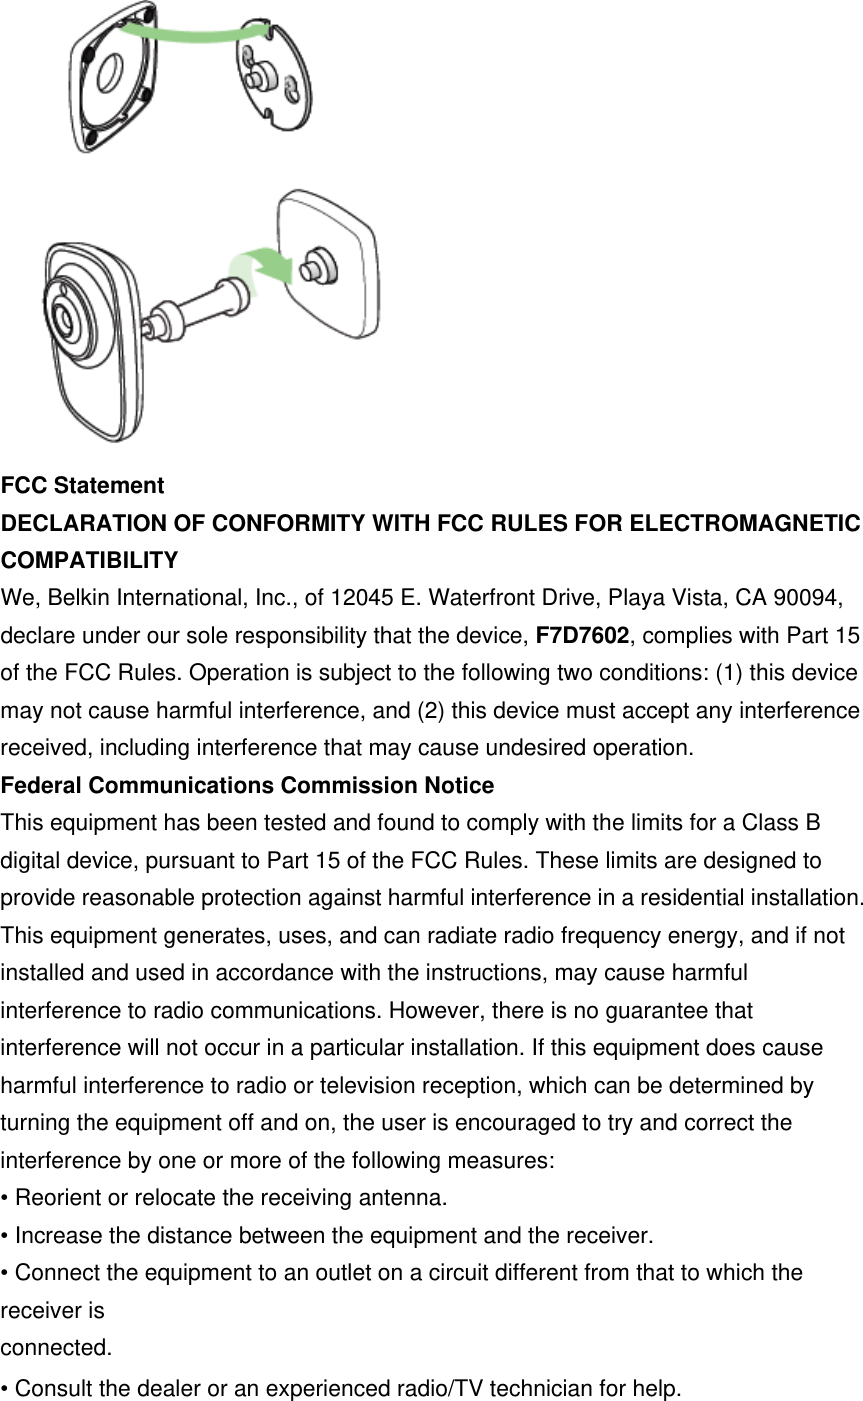  FCC Statement DECLARATION OF CONFORMITY WITH FCC RULES FOR ELECTROMAGNETIC COMPATIBILITY We, Belkin International, Inc., of 12045 E. Waterfront Drive, Playa Vista, CA 90094, declare under our sole responsibility that the device, F7D7602, complies with Part 15 of the FCC Rules. Operation is subject to the following two conditions: (1) this device may not cause harmful interference, and (2) this device must accept any interference received, including interference that may cause undesired operation.Federal Communications Commission Notice This equipment has been tested and found to comply with the limits for a Class B digital device, pursuant to Part 15 of the FCC Rules. These limits are designed to provide reasonable protection against harmful interference in a residential installation. This equipment generates, uses, and can radiate radio frequency energy, and if not installed and used in accordance with the instructions, may cause harmful interference to radio communications. However, there is no guarantee that interference will not occur in a particular installation. If this equipment does cause harmful interference to radio or television reception, which can be determined by turning the equipment off and on, the user is encouraged to try and correct the interference by one or more of the following measures:• Reorient or relocate the receiving antenna. • Increase the distance between the equipment and the receiver. • Connect the equipment to an outlet on a circuit different from that to which the receiver is   connected. • Consult the dealer or an experienced radio/TV technician for help. 